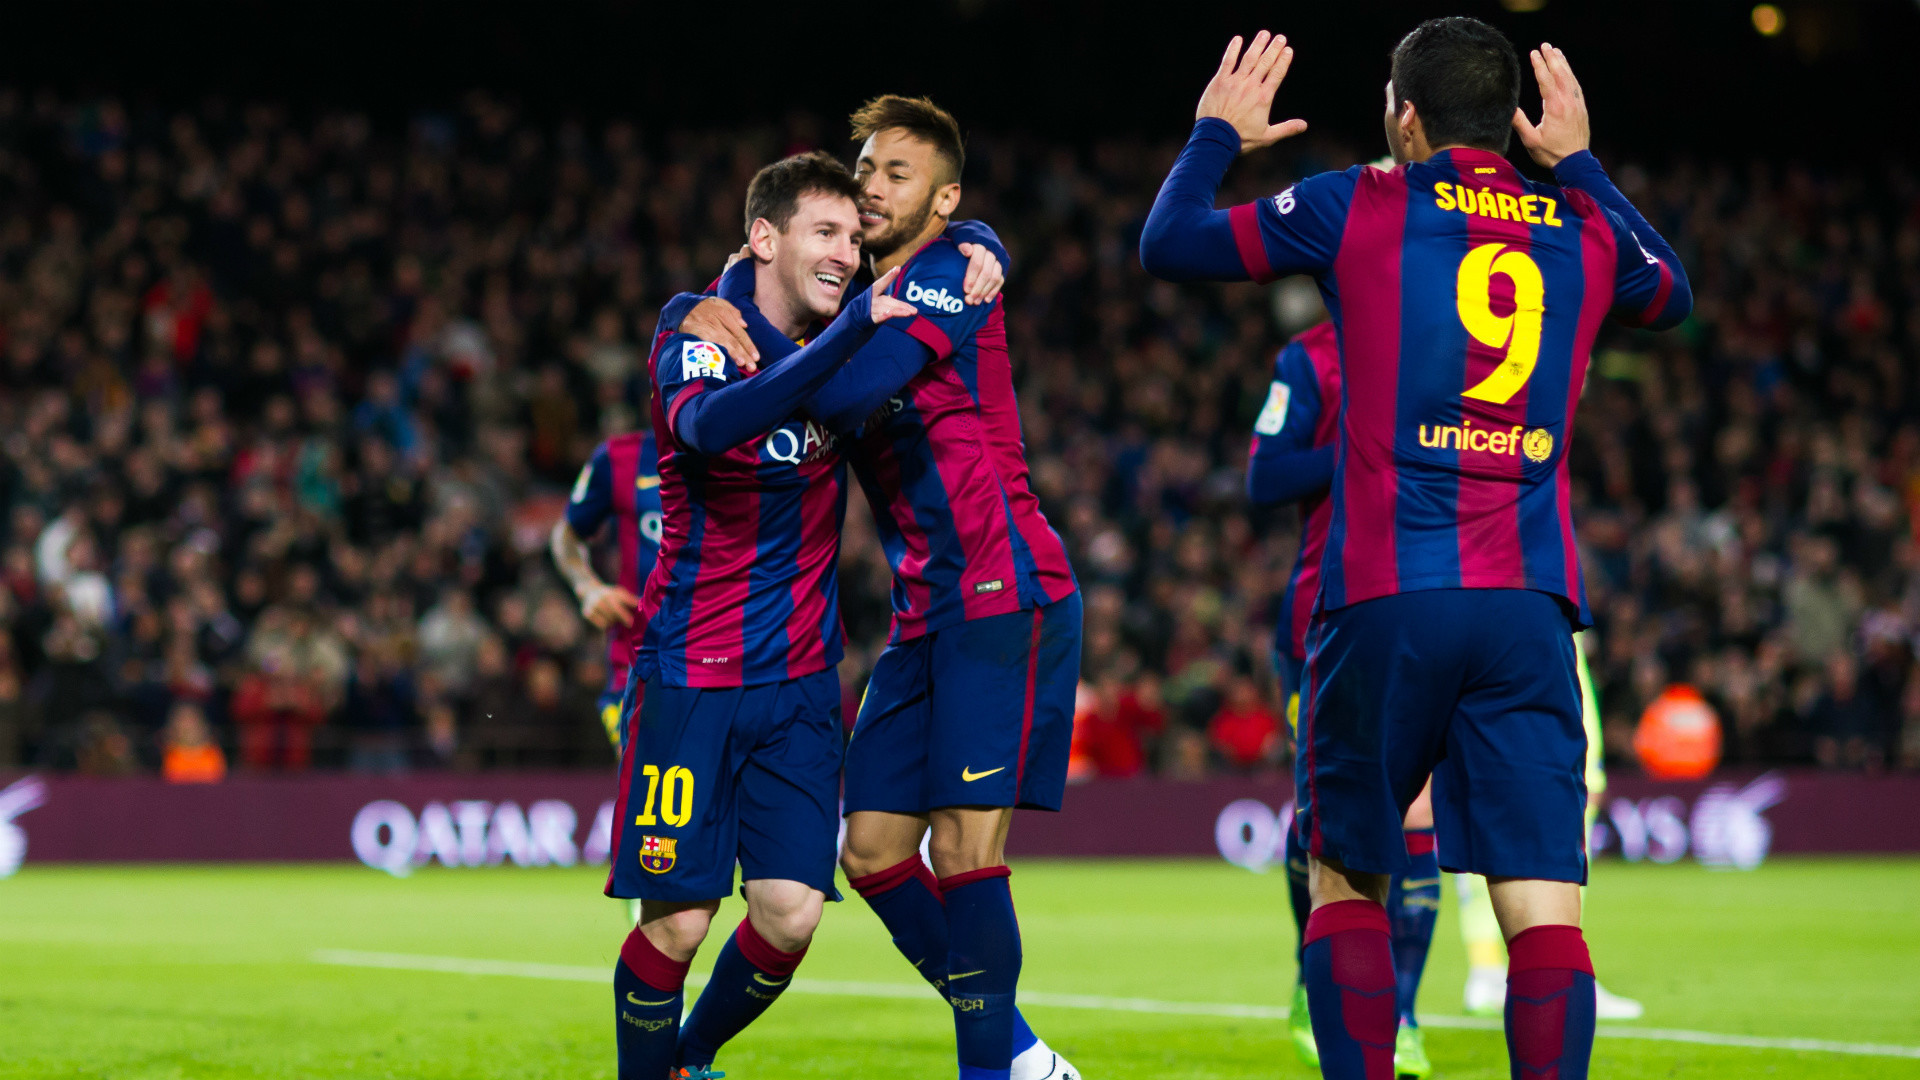 1920x1080 Luis Suarez and Neymar have helped Messi reach his best, says Diego Simeone